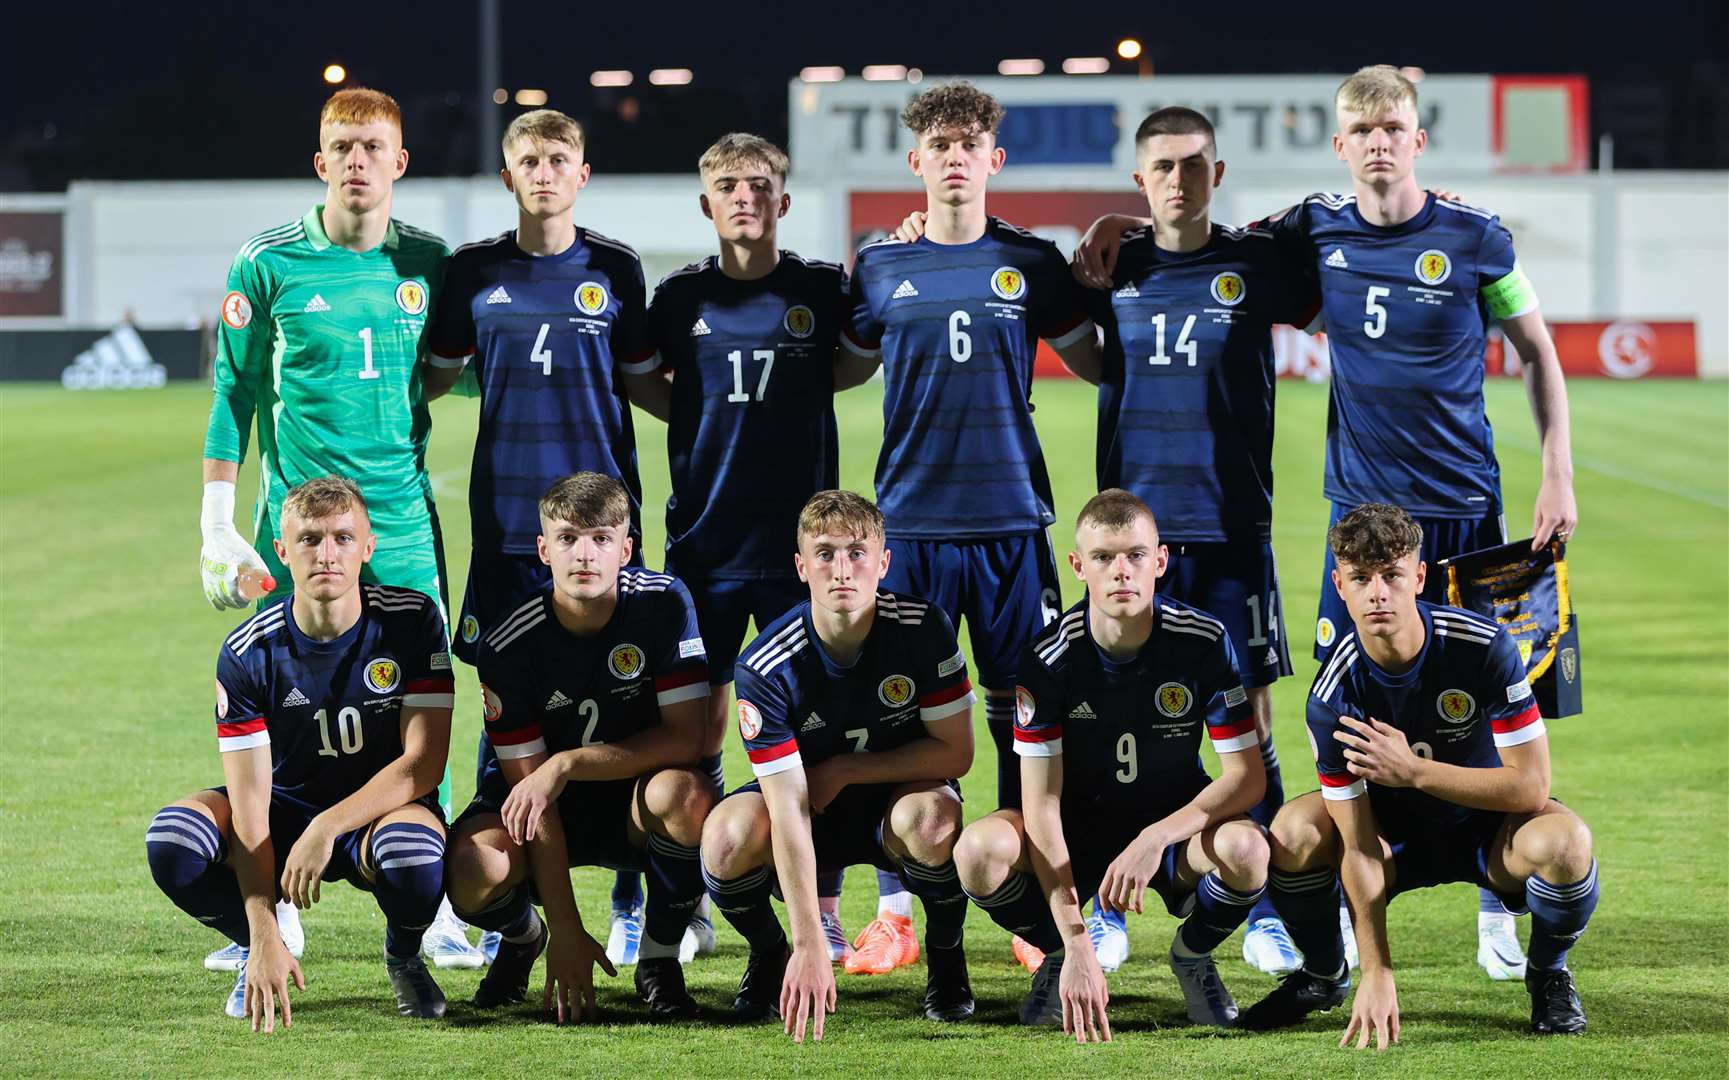 The Scotland team before their opening match in the UEFA Under-17 Championship finals in Israel this week, with Magnus Mackenzie in the centre of the front row. Picture: Scottish FA